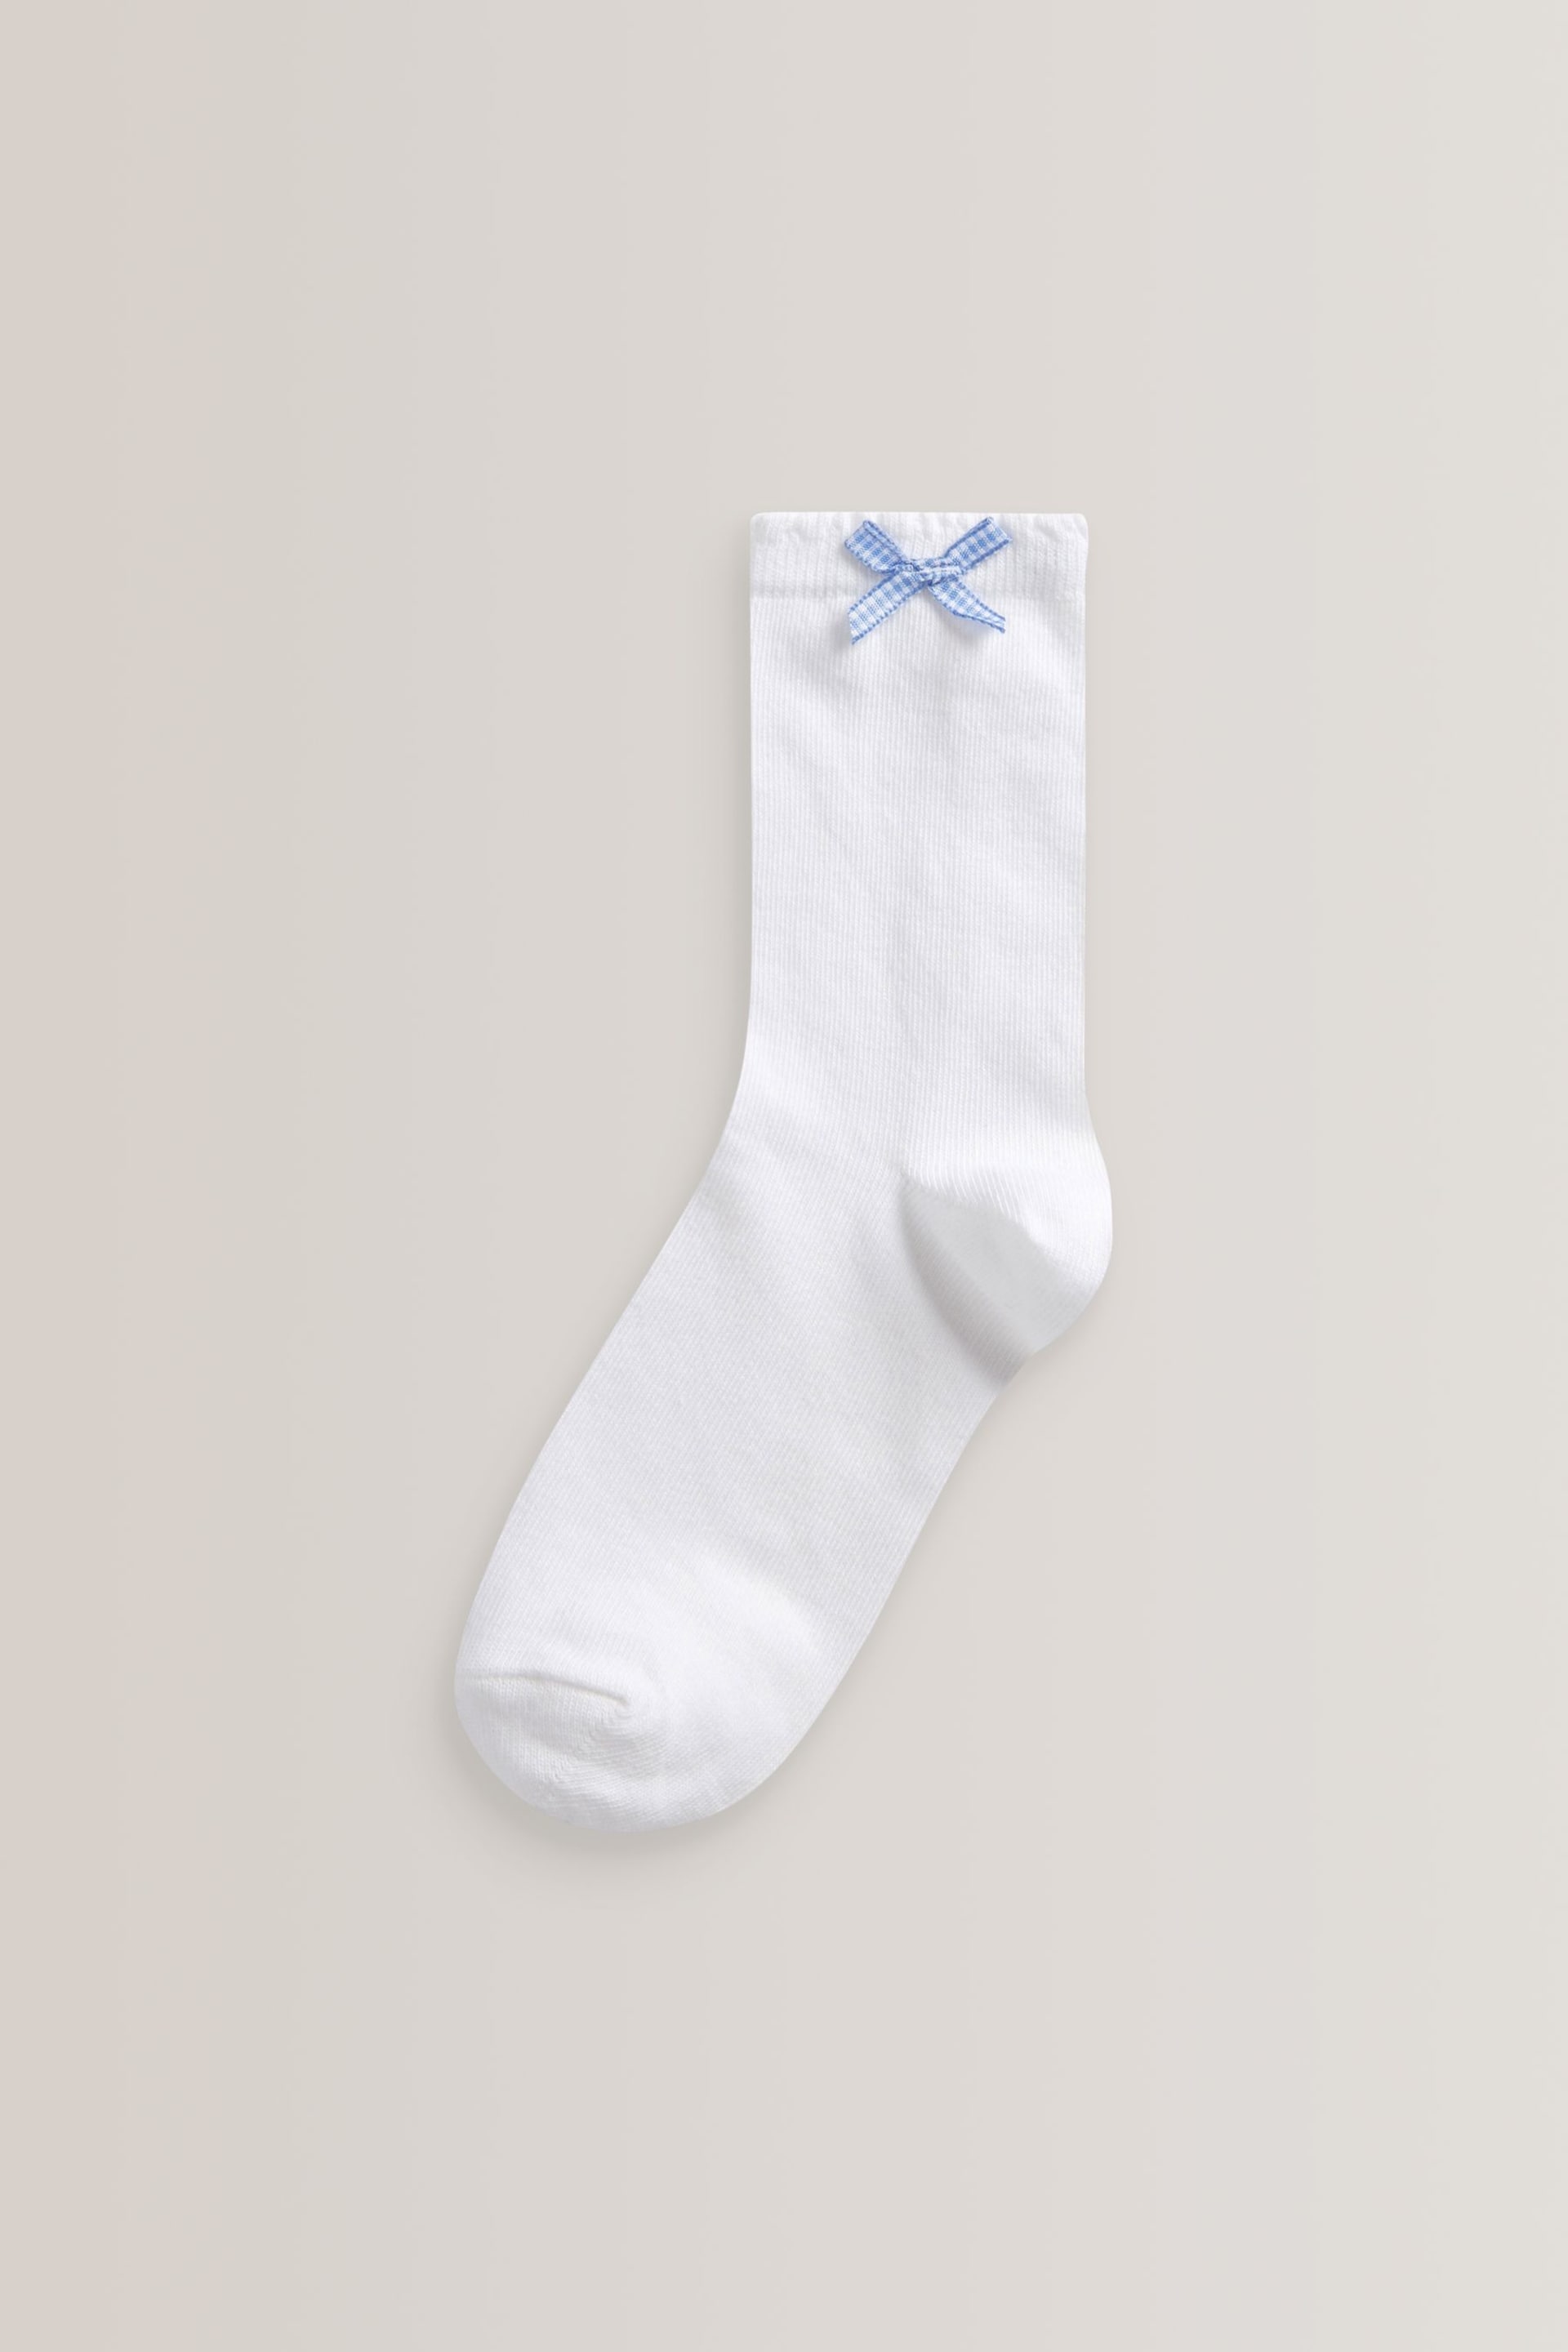 Blue 5 Pack Cotton Rich Gingham Ankle School Socks - Image 4 of 6